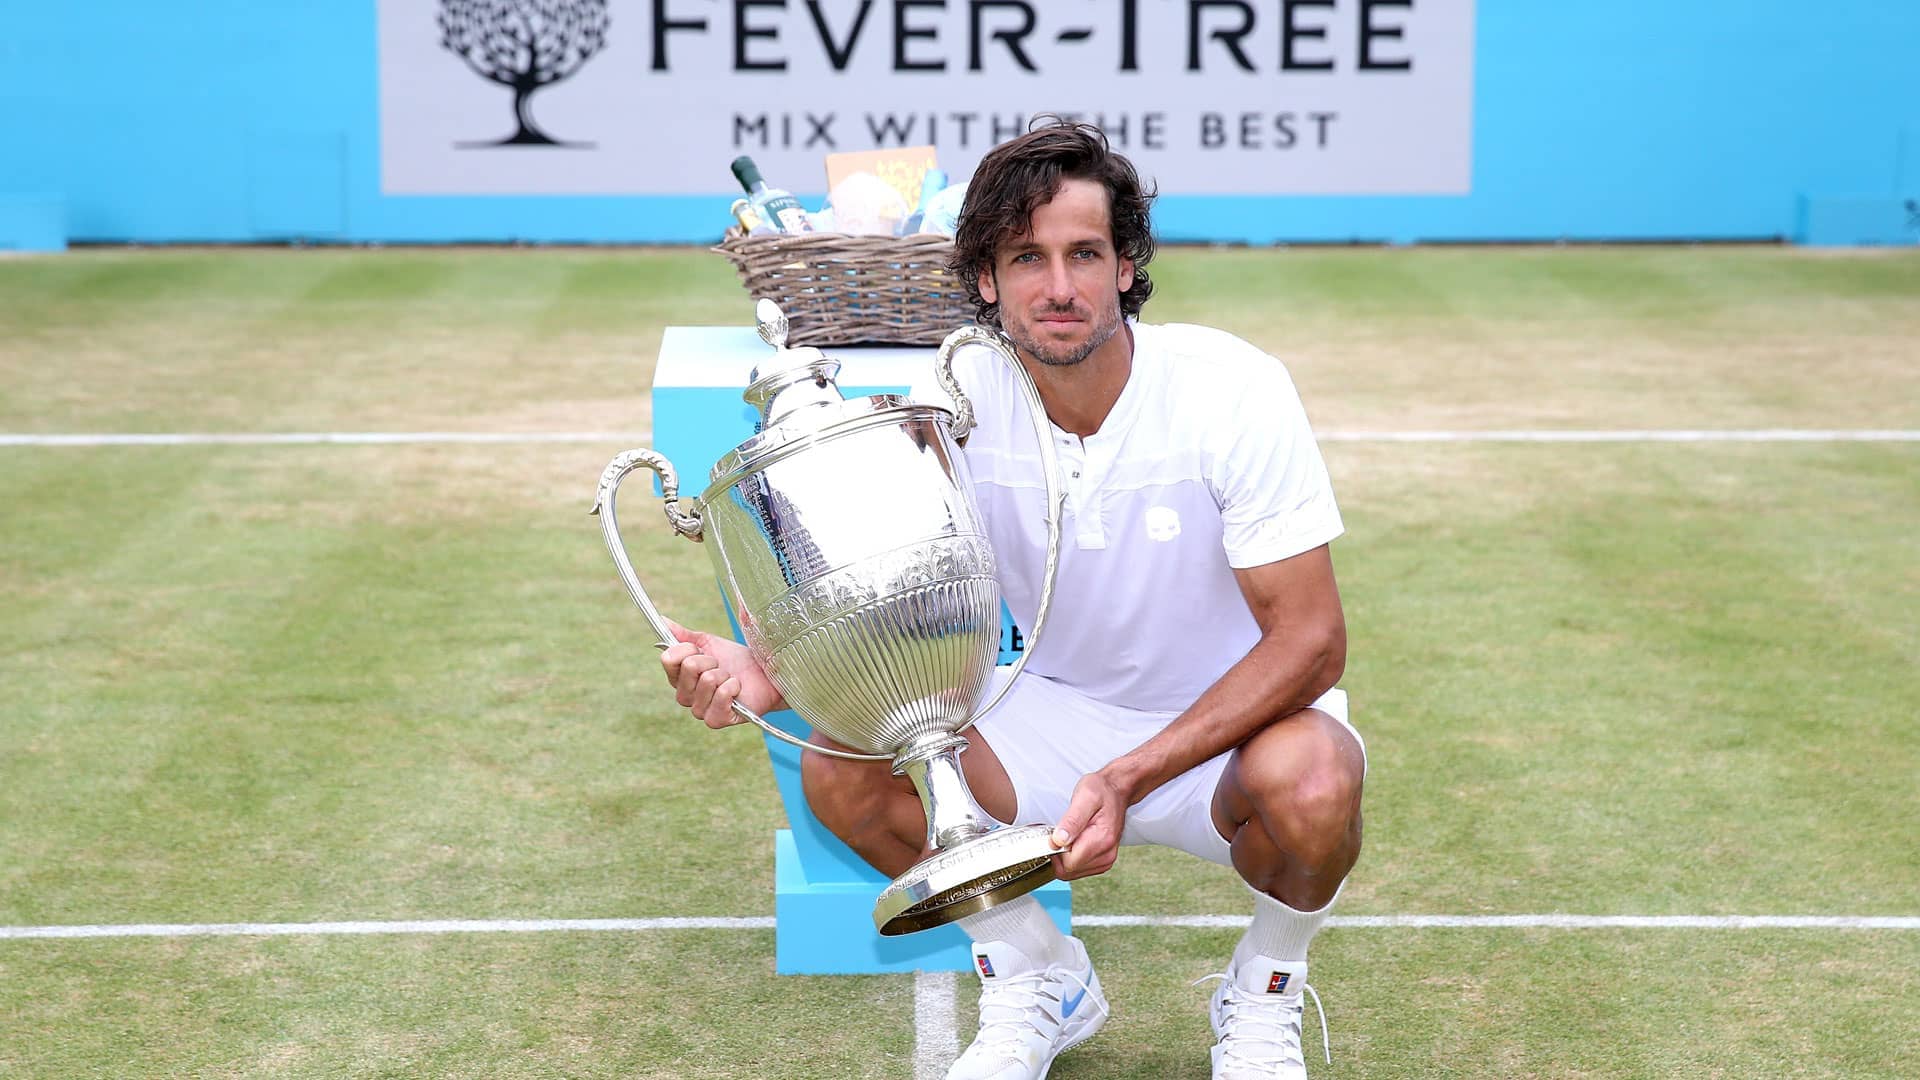 Perfervid Salg Advarsel Feliciano Lopez Wins Queen's Club Title Over Gilles Simon | ATP Tour |  Tennis